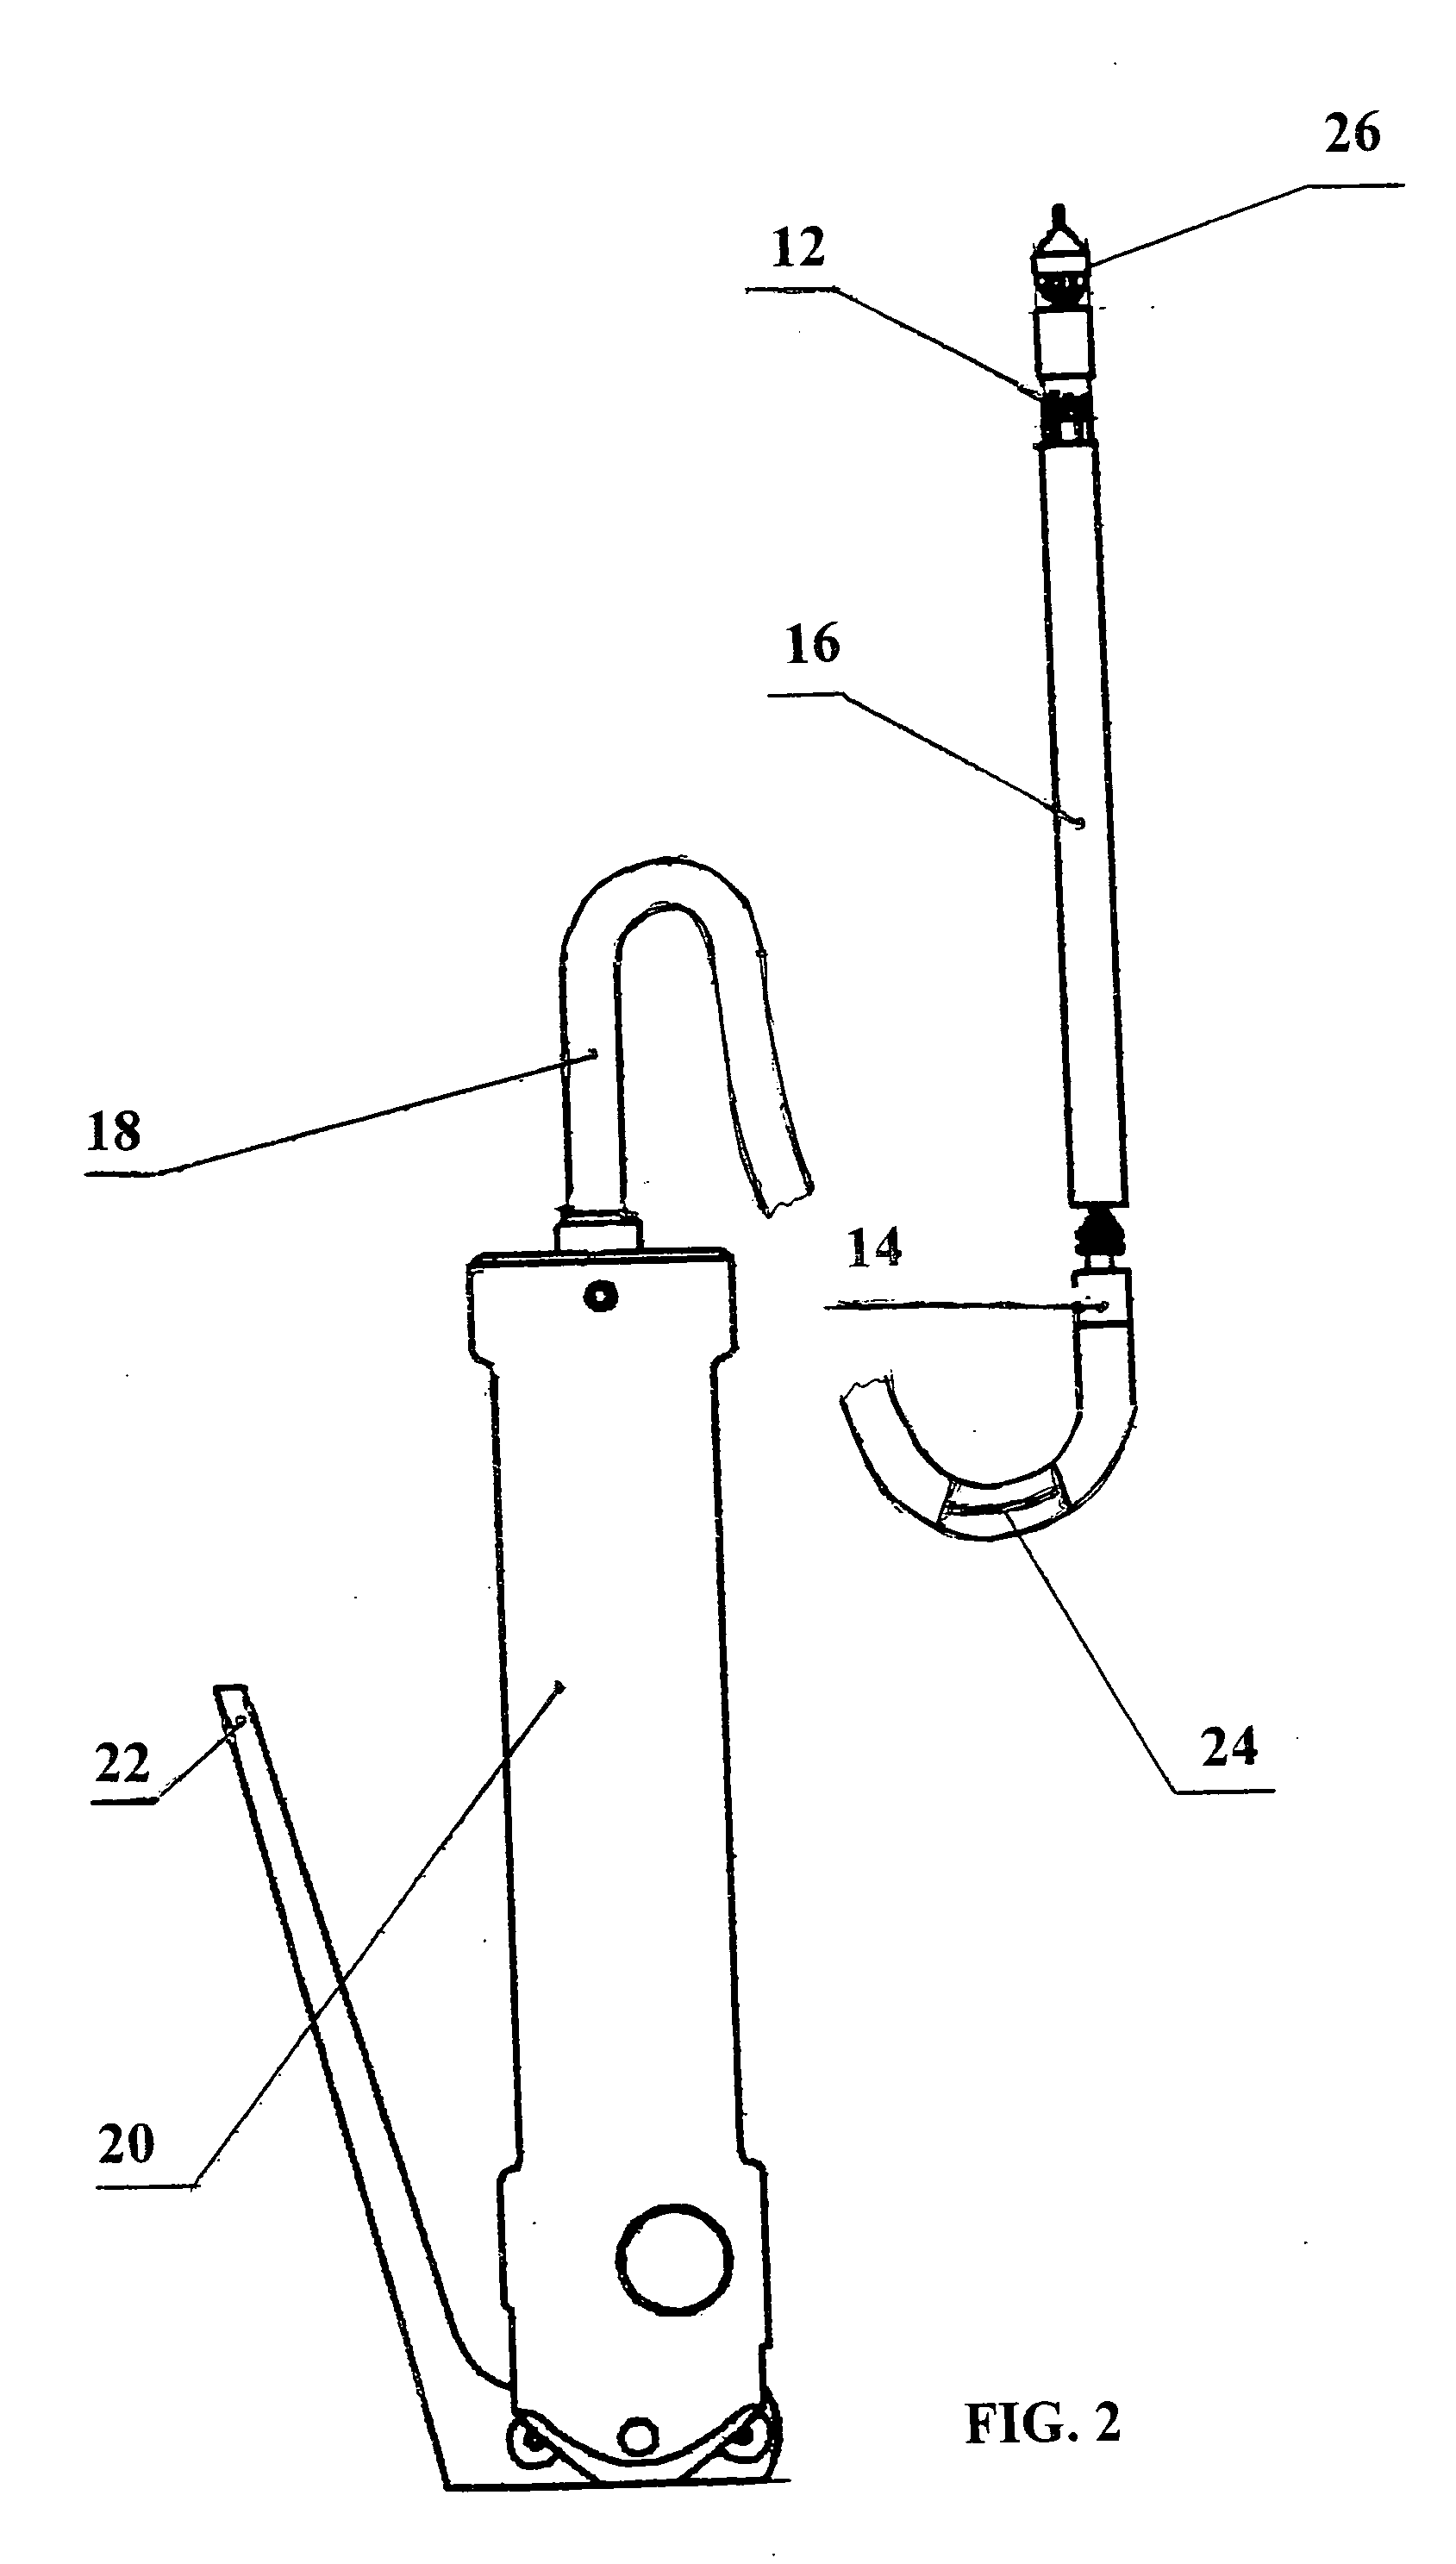 Graft delivery and anchoring system